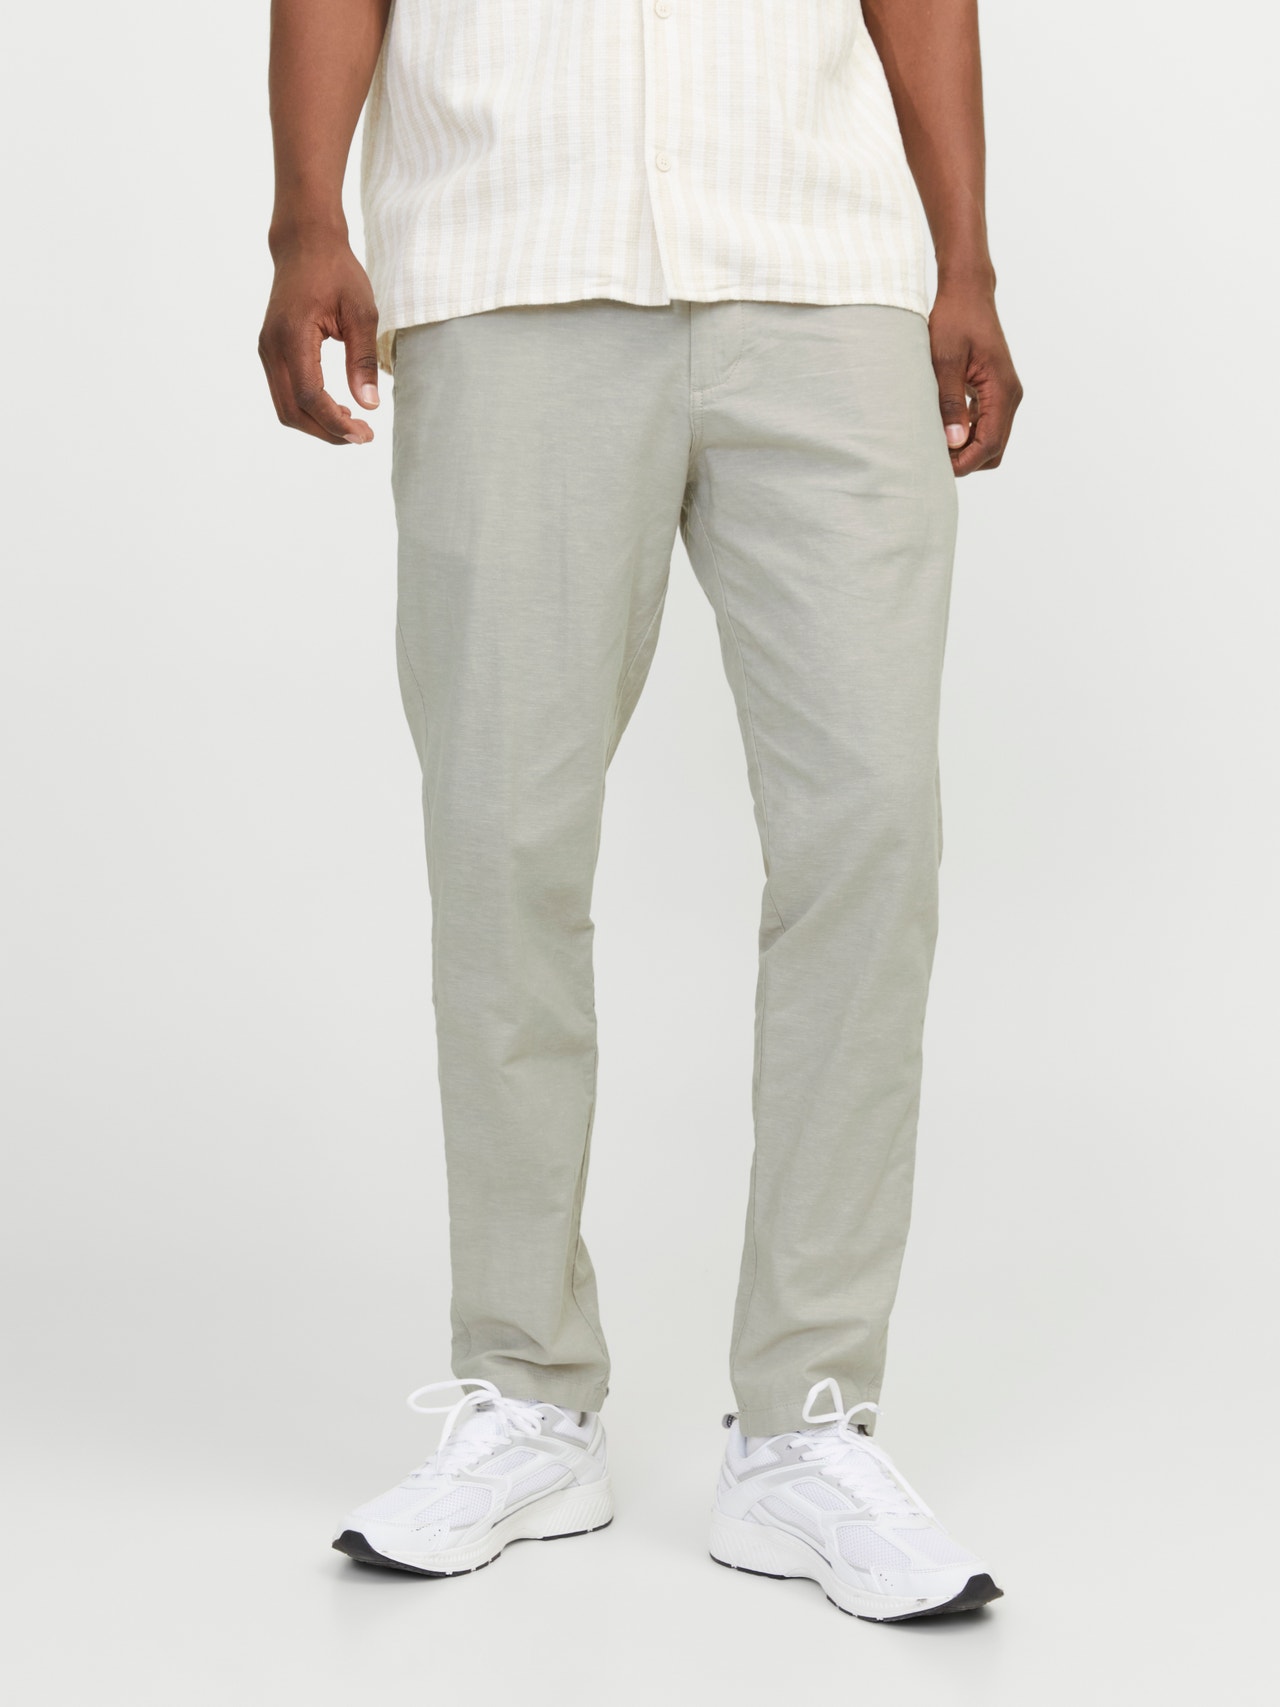 Jack & Jones Tapered Fit Chinos -Wrought Iron - 12248604